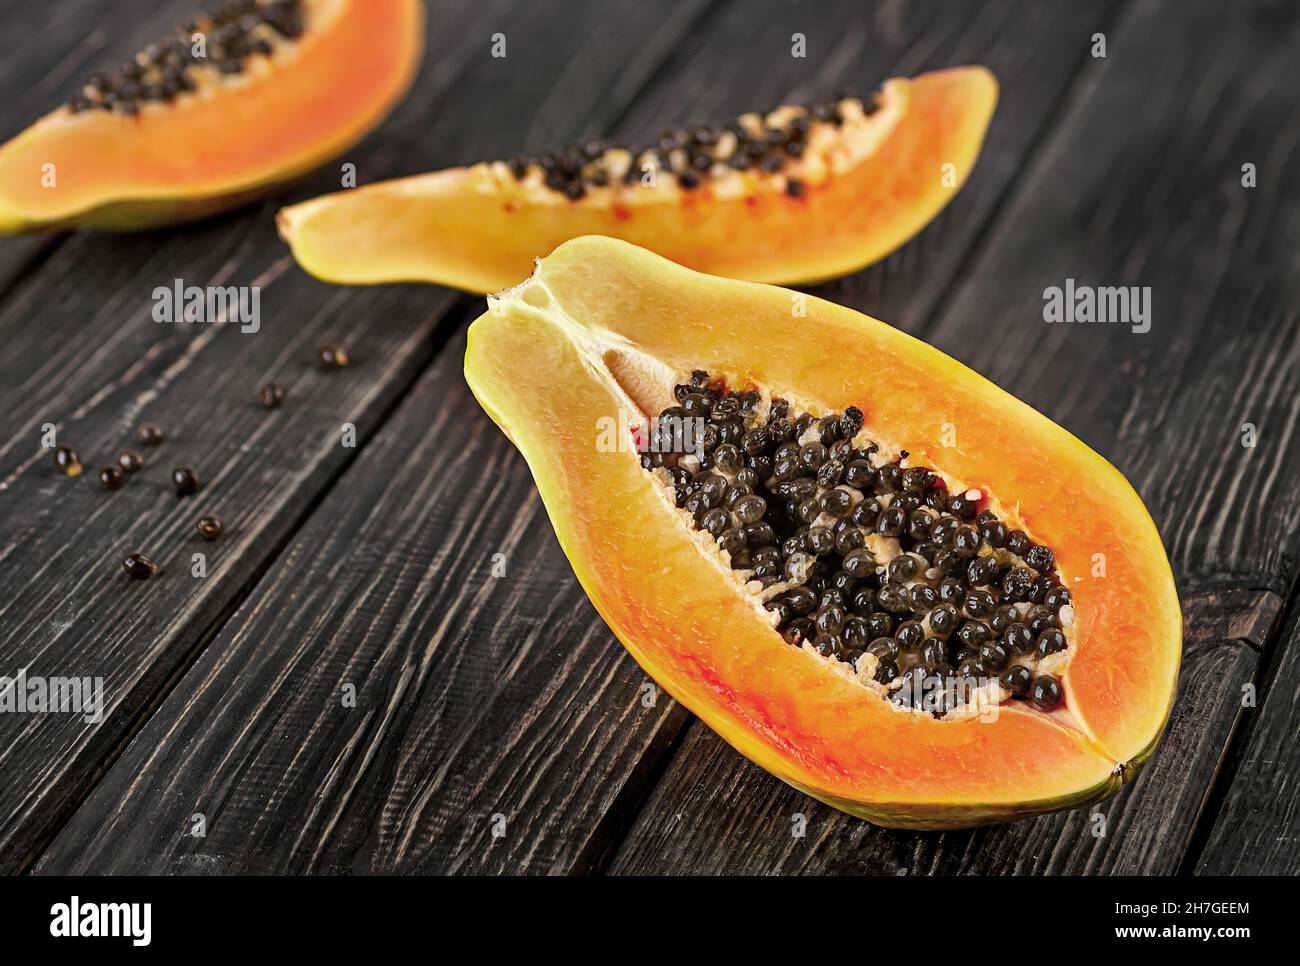 Several pieces of ripe papaya on a wooden table. Quarters of papaya on a dark plank table. Stock Photo